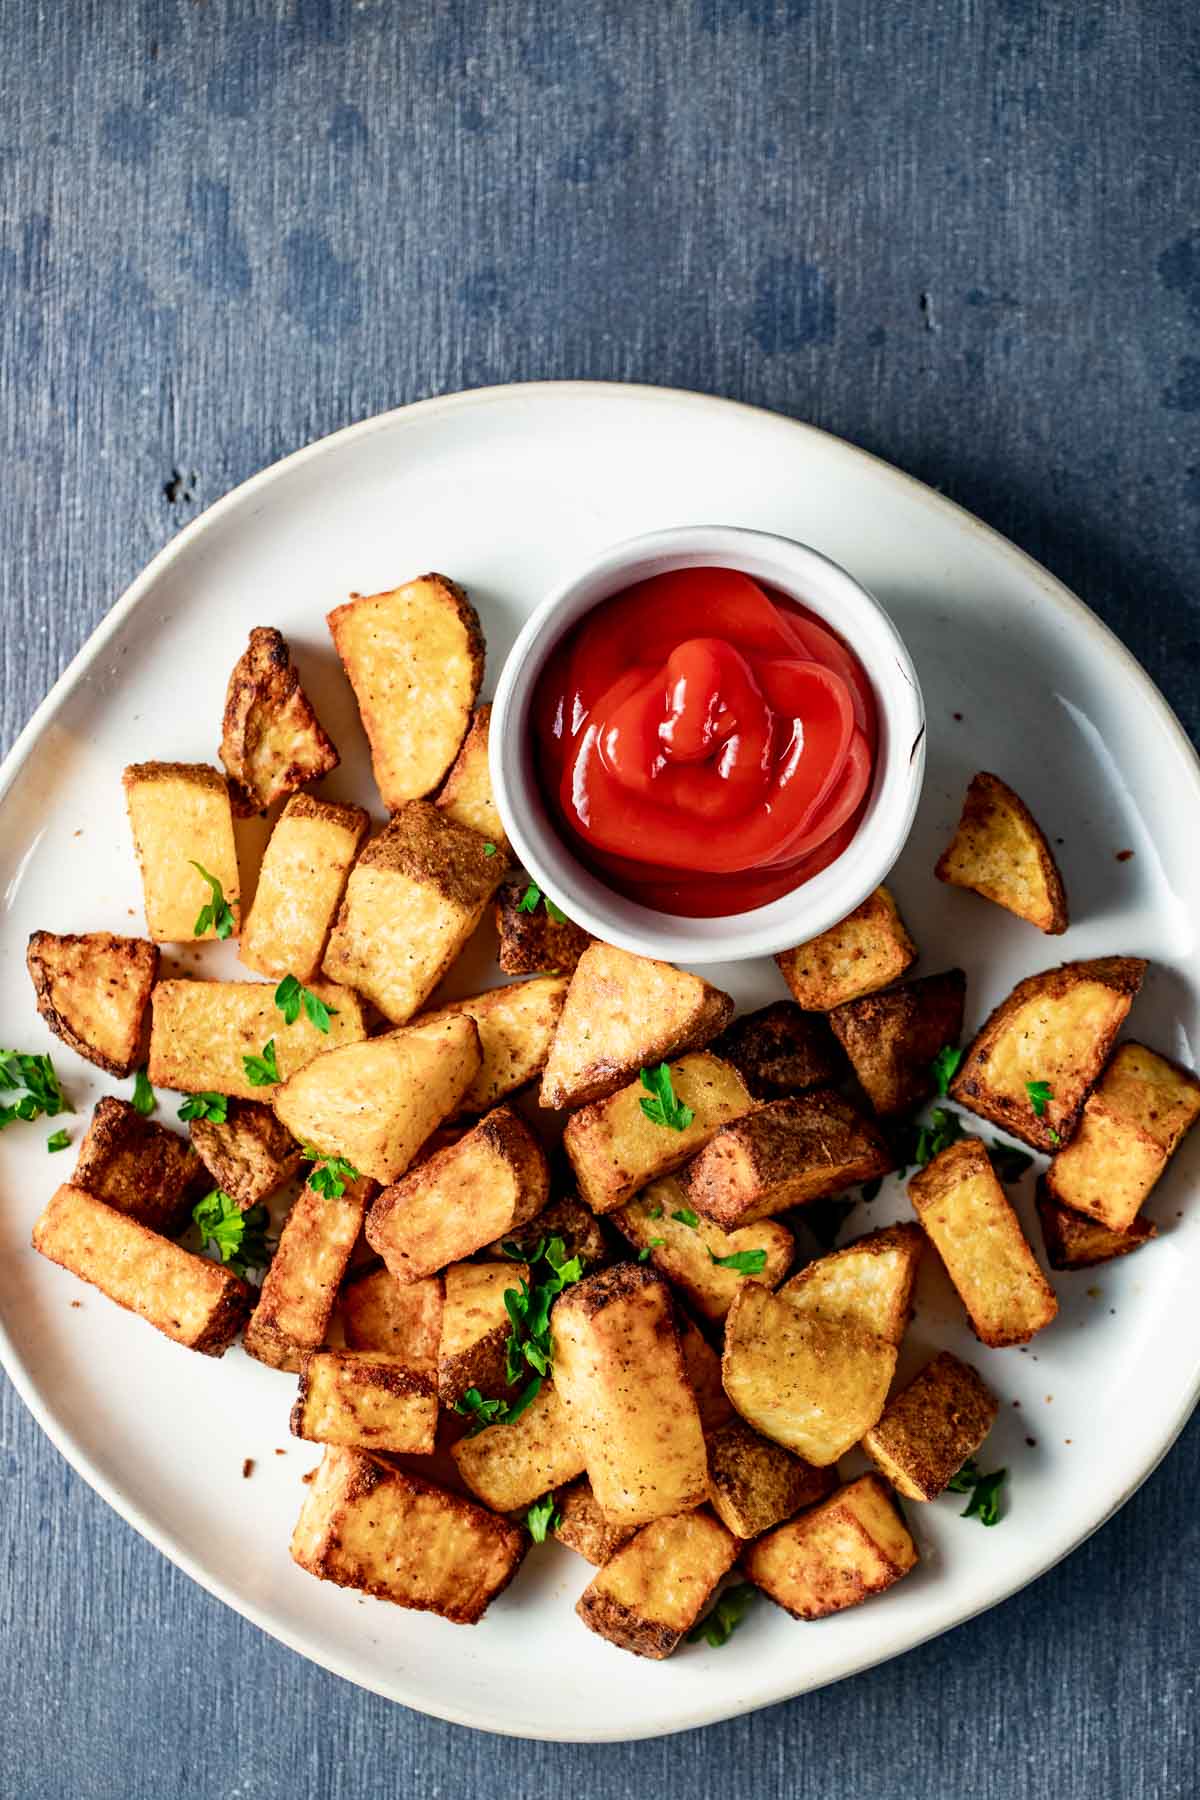 Overhead view of air fryer breakfast potatoes on a plate with ketchup.